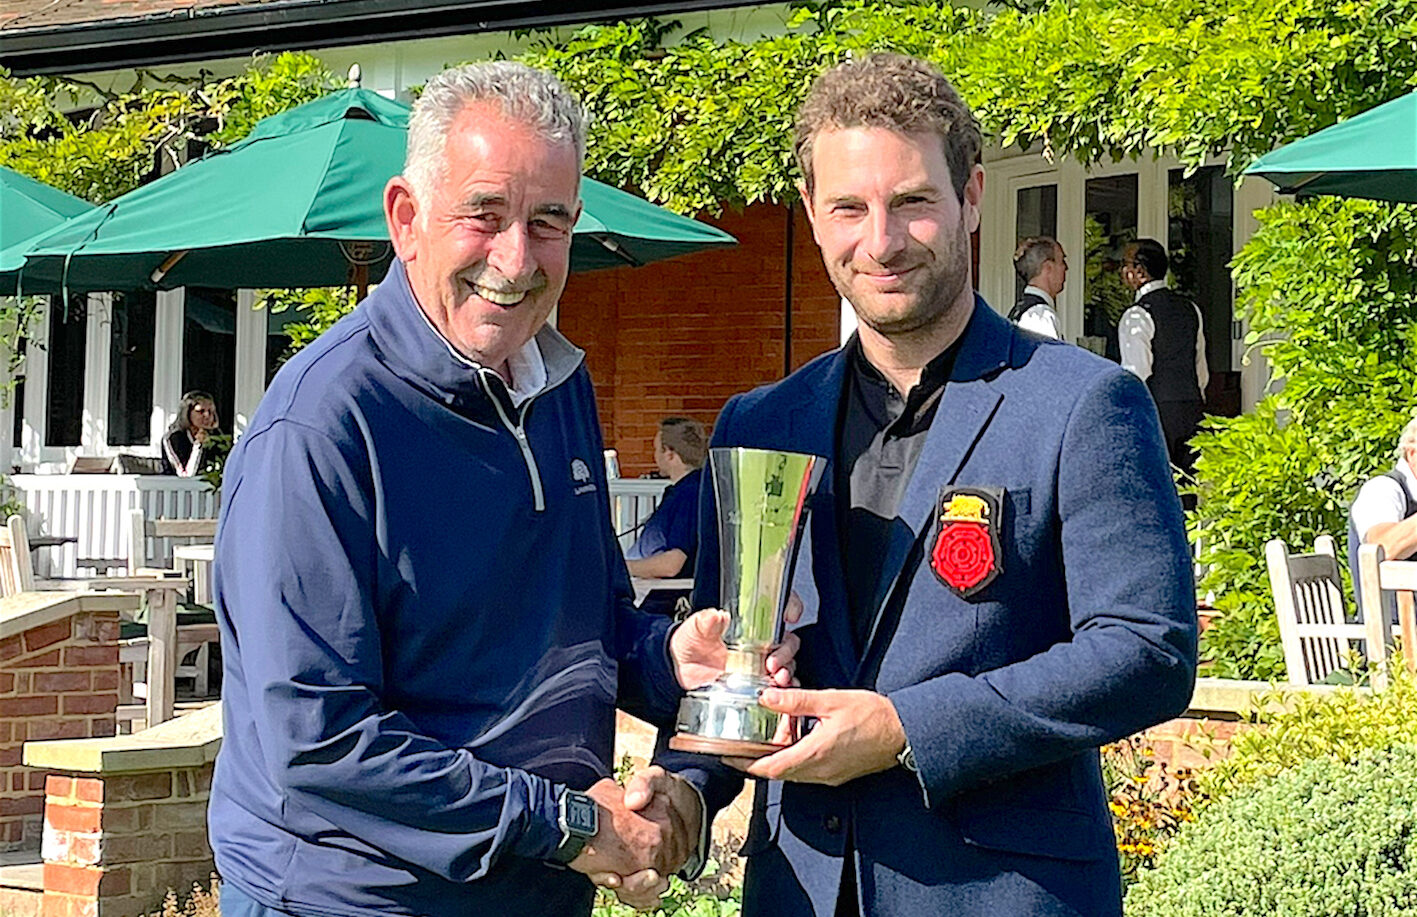 Sunningdale member Sam Torrance was on hand to present the Gerald Micklem Cup to champion Toby Burden